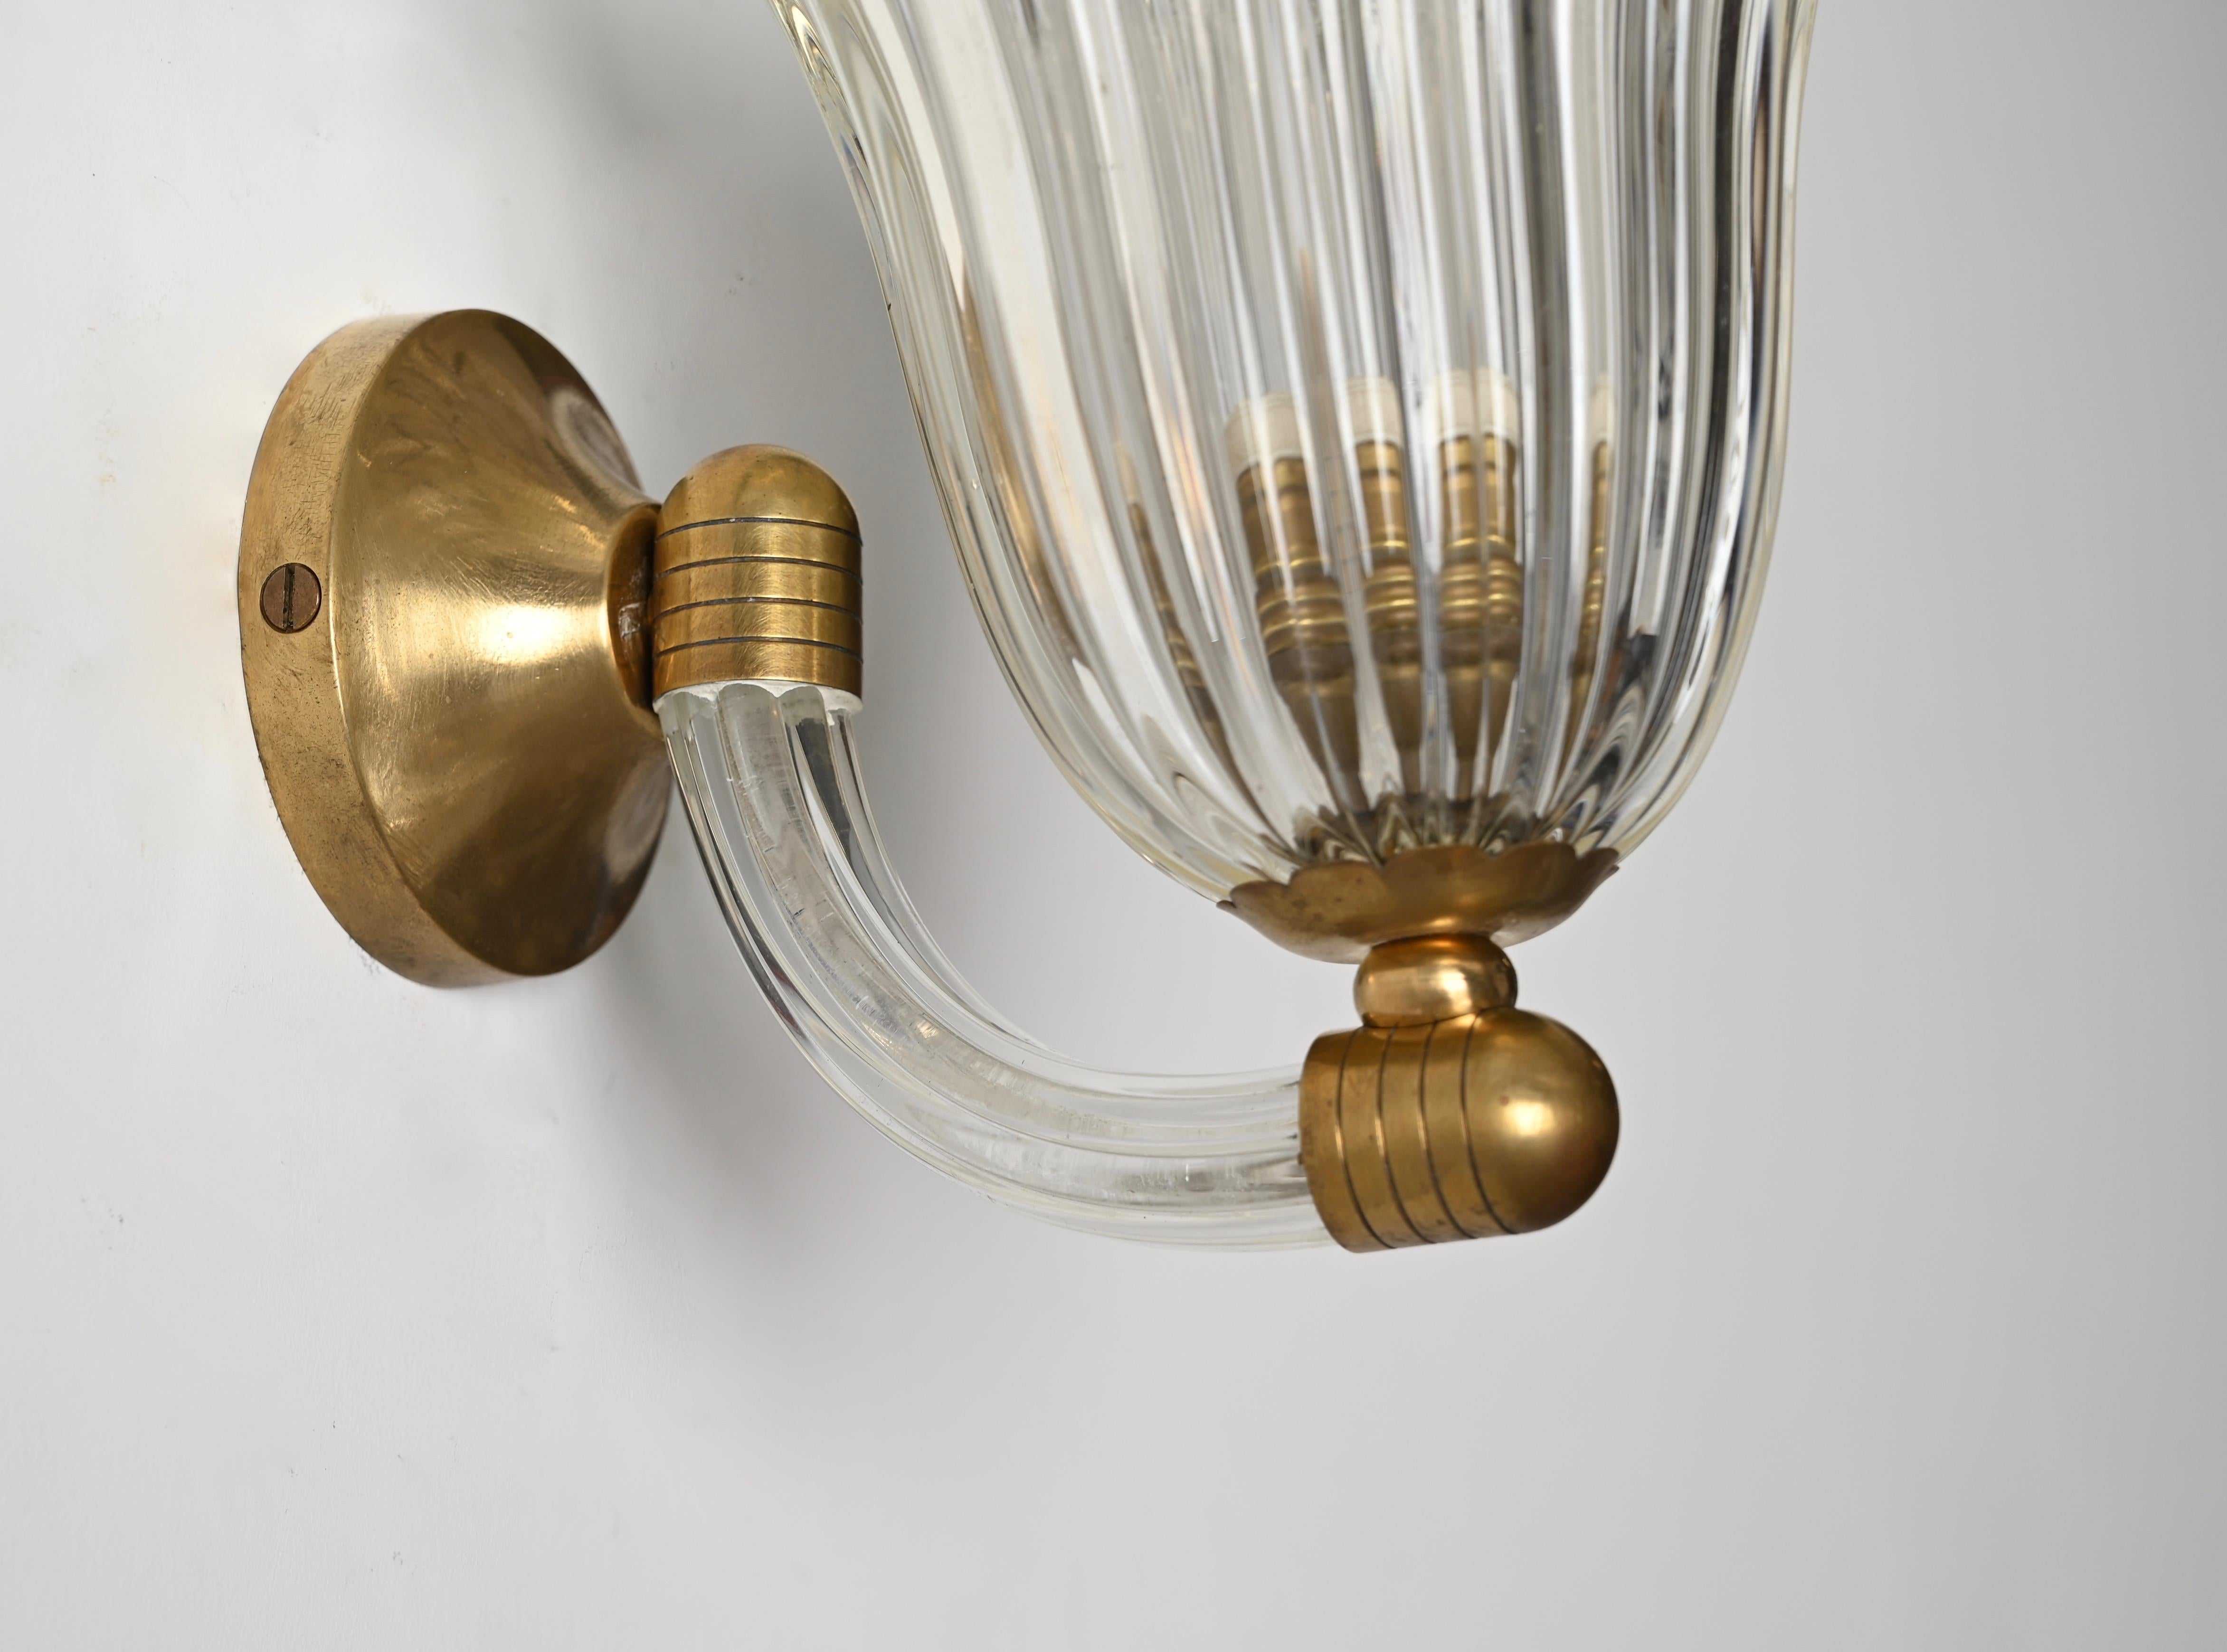 Italian Pair of Murano Glass and Brass Flower Sconces, by Barovier, Italy 1950s